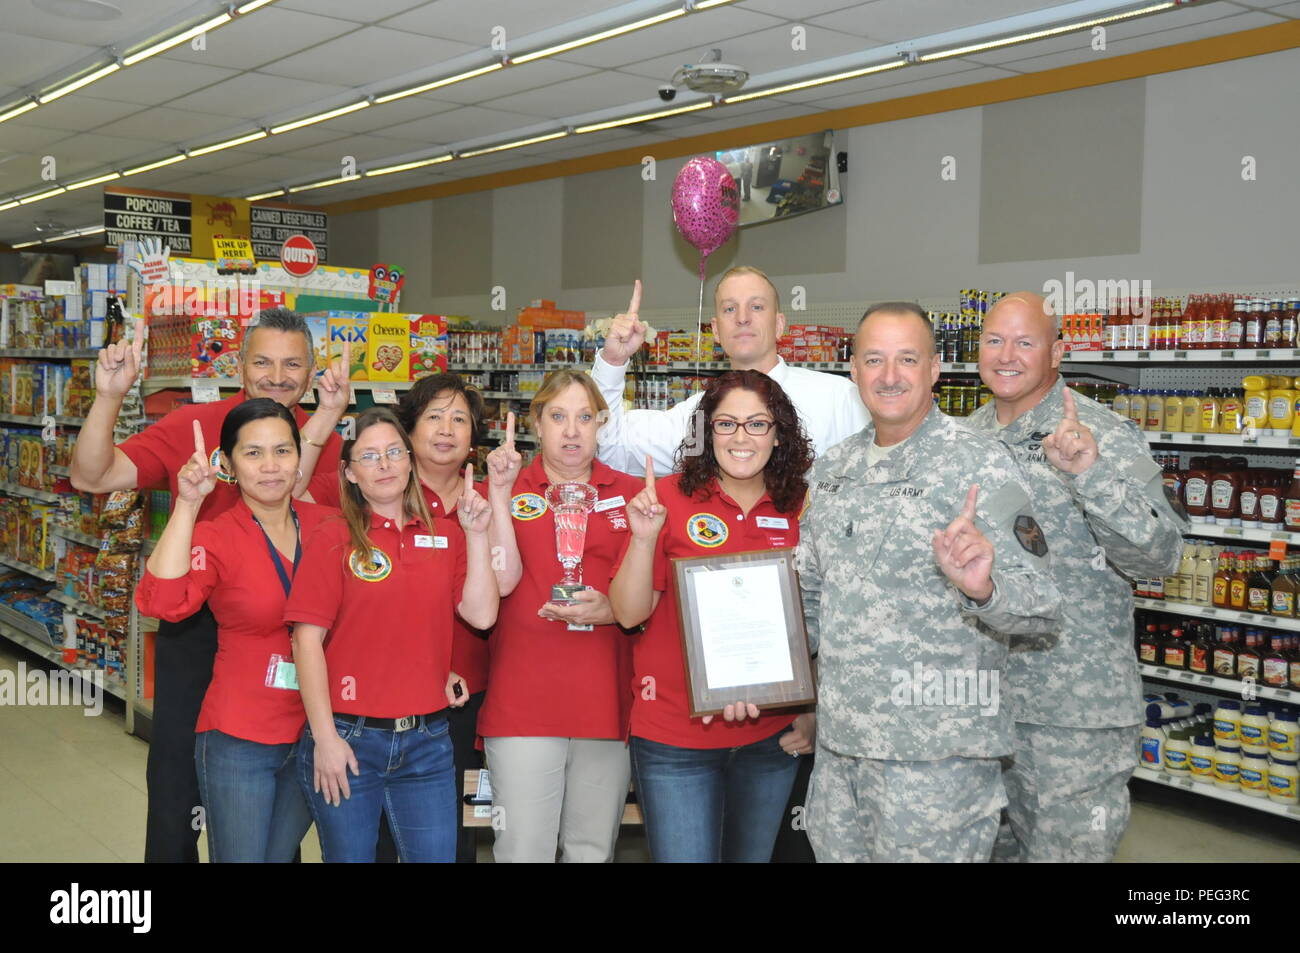 Fort Hunter Liggett, Calif., won the Richard M. Paget Award for the Best Small Commissary in the United States. From left, Store Manager David Flores, Head Bagger Delia Maguire, store associates   Barbara Hicks and Virginia Corpus, Grocery Manager Suzanne McKinley, Store  Associate Estella Murillo, Fort Hunter Liggett and Ord Community Commissary   Store Director Alex King, Command Sgt. Maj. Tracey Barlogio, Fort  Hunter Liggett Garrison Command Sergeant Major and Lt. Col. Michael B. Bailey, Fort Hunter Liggett Garrison Deputy Commander. (Army photo: Michael Guterl, Fort Hunter Liggett Public  Stock Photo